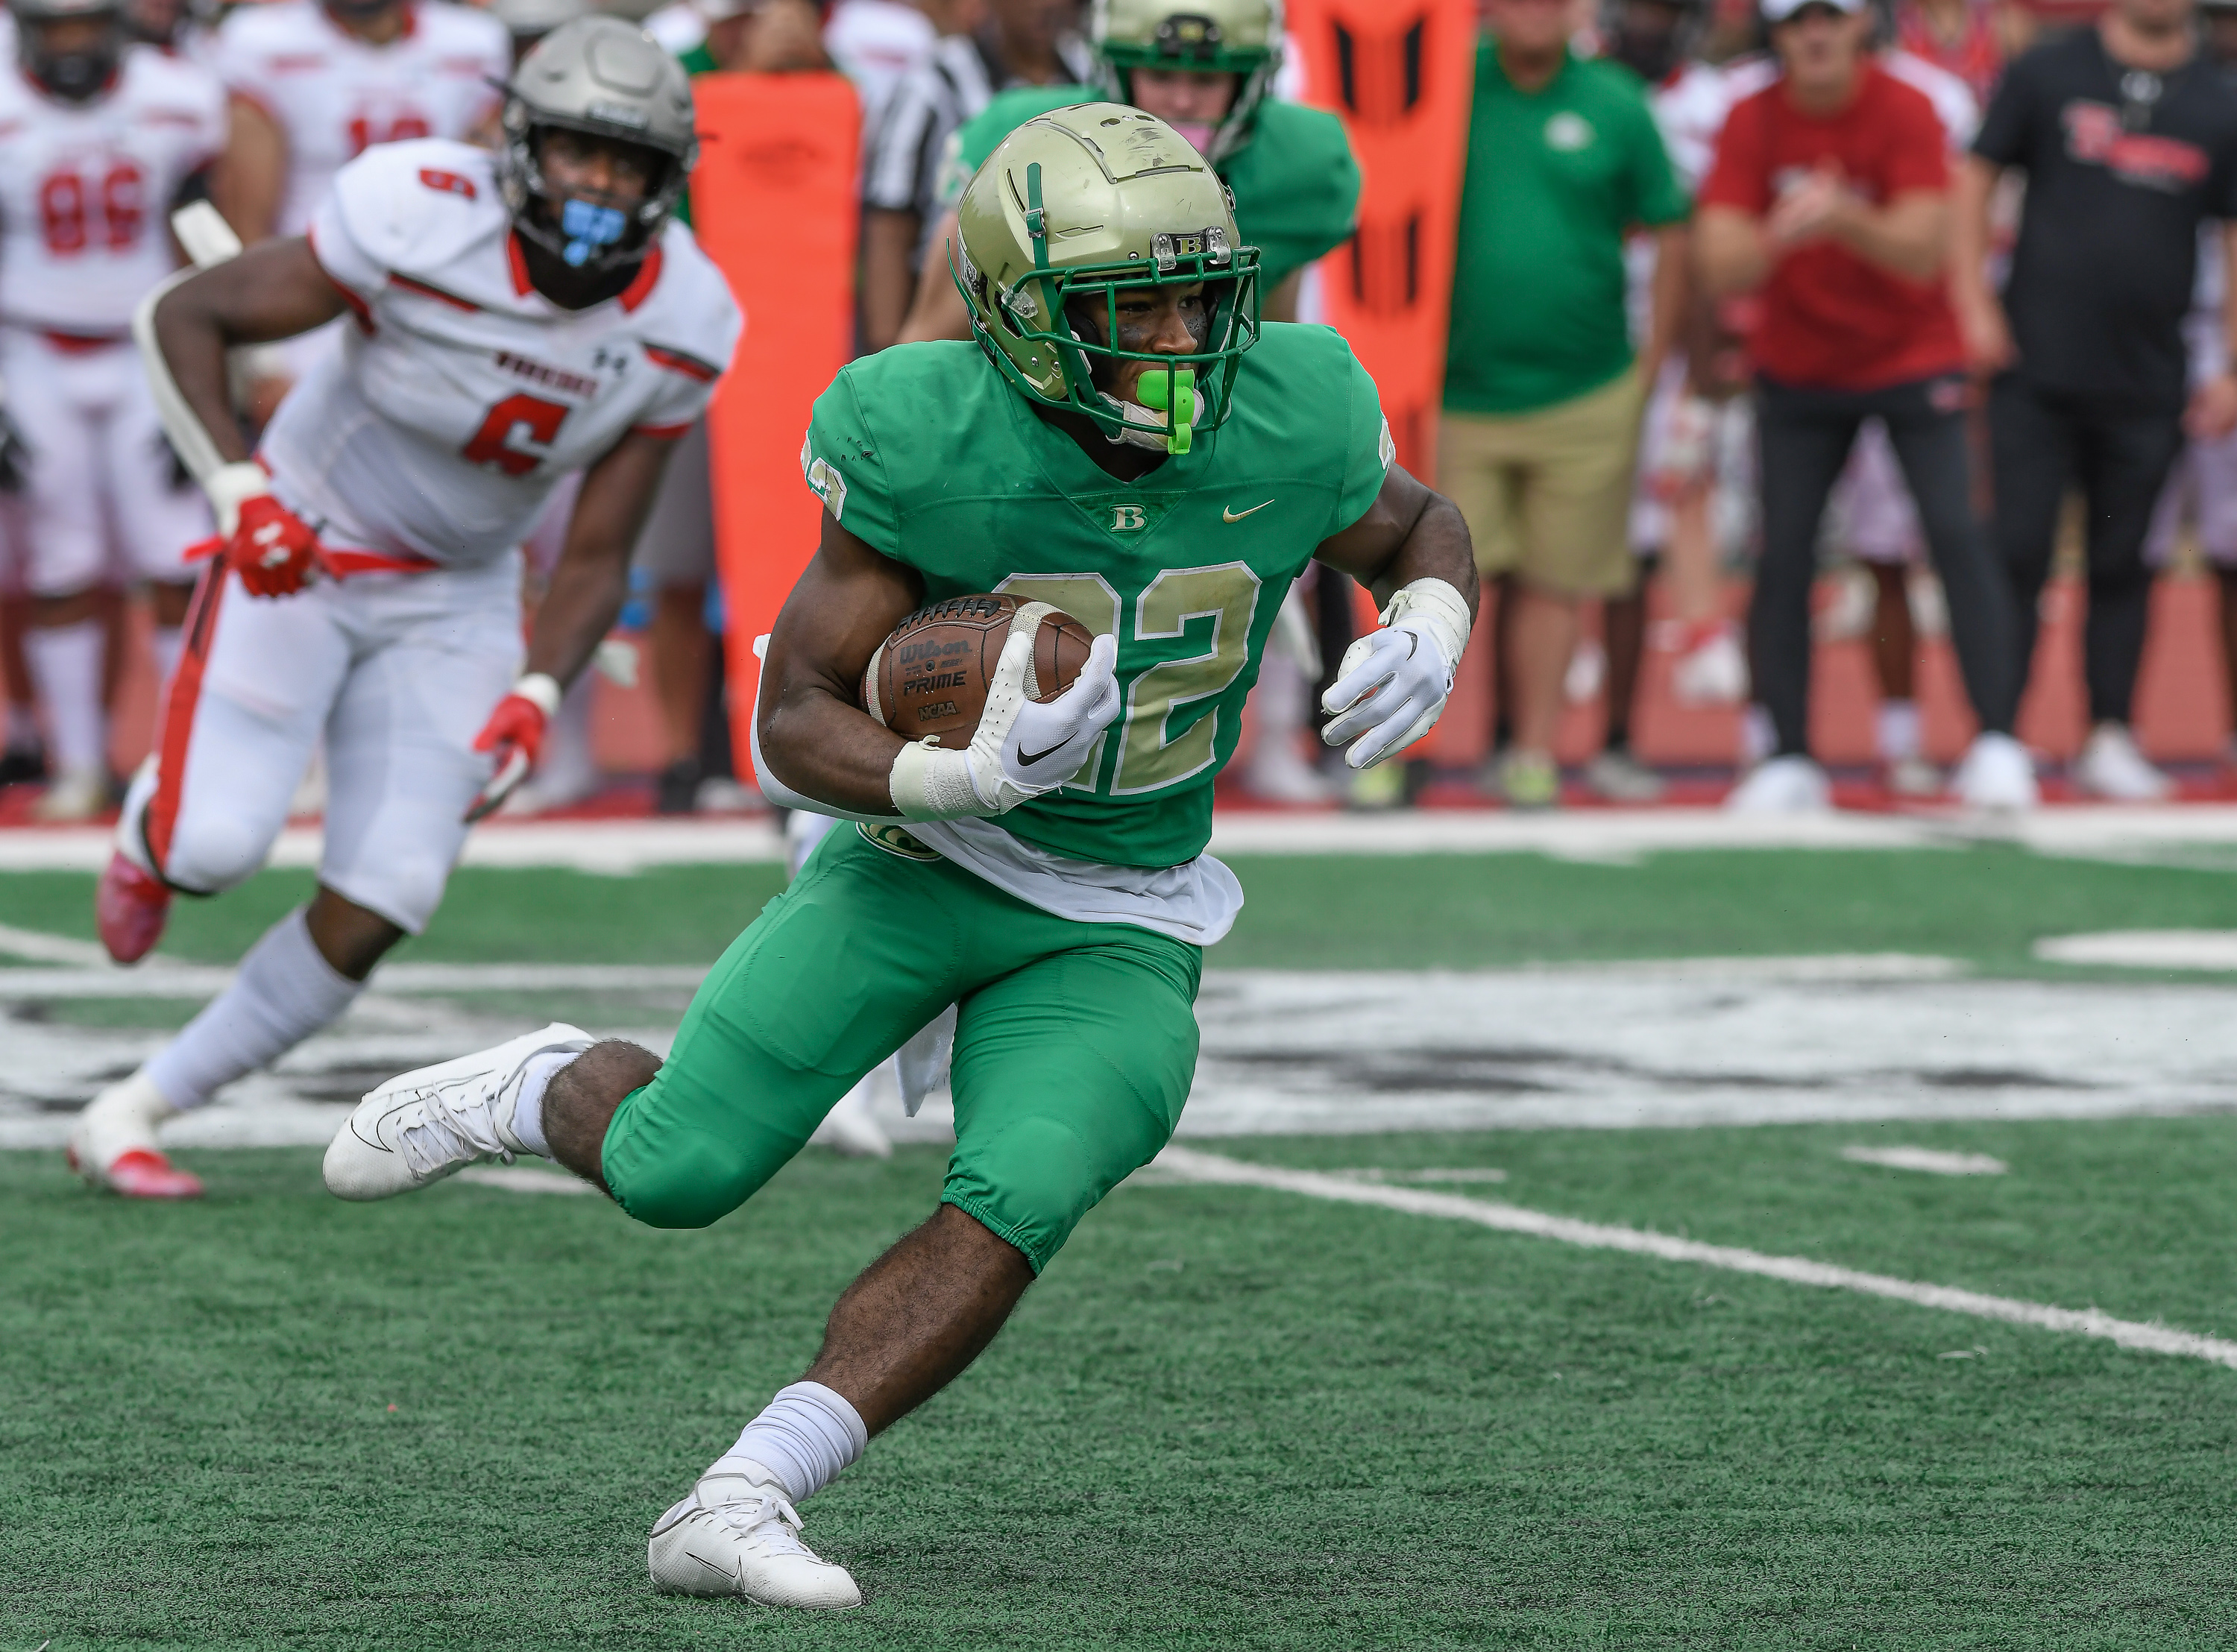 Buford's Justice Haynes, a 4-Star Alabama commit, overcame a slow start to rush for 96 yards and two scores. He also returned a kickoff for a touchdown.